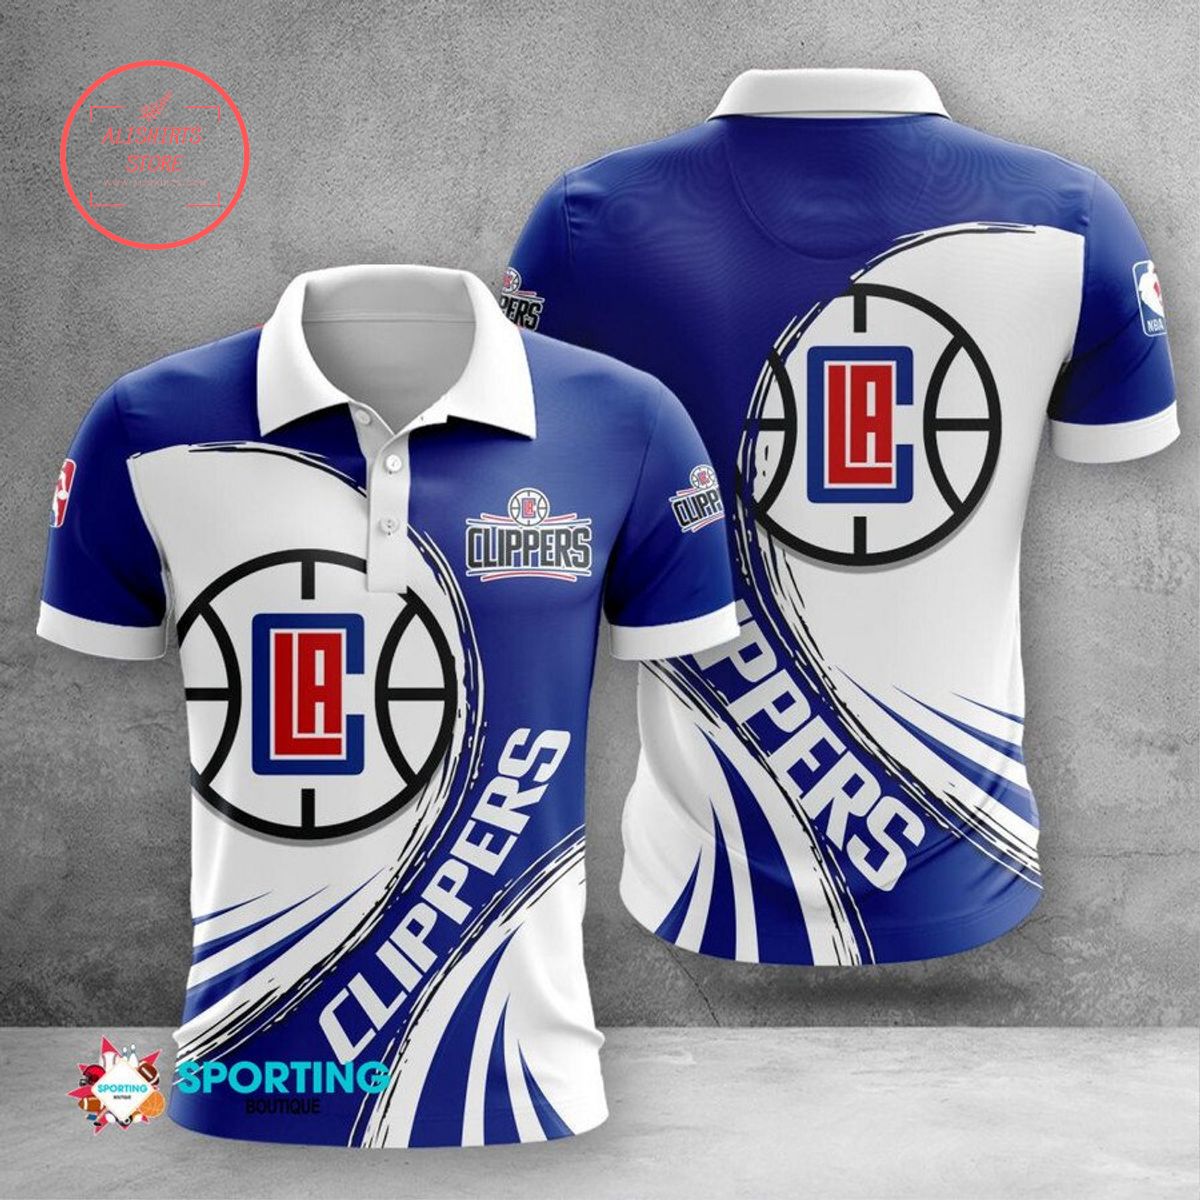 Los Angeles Clippers Polo Shirt